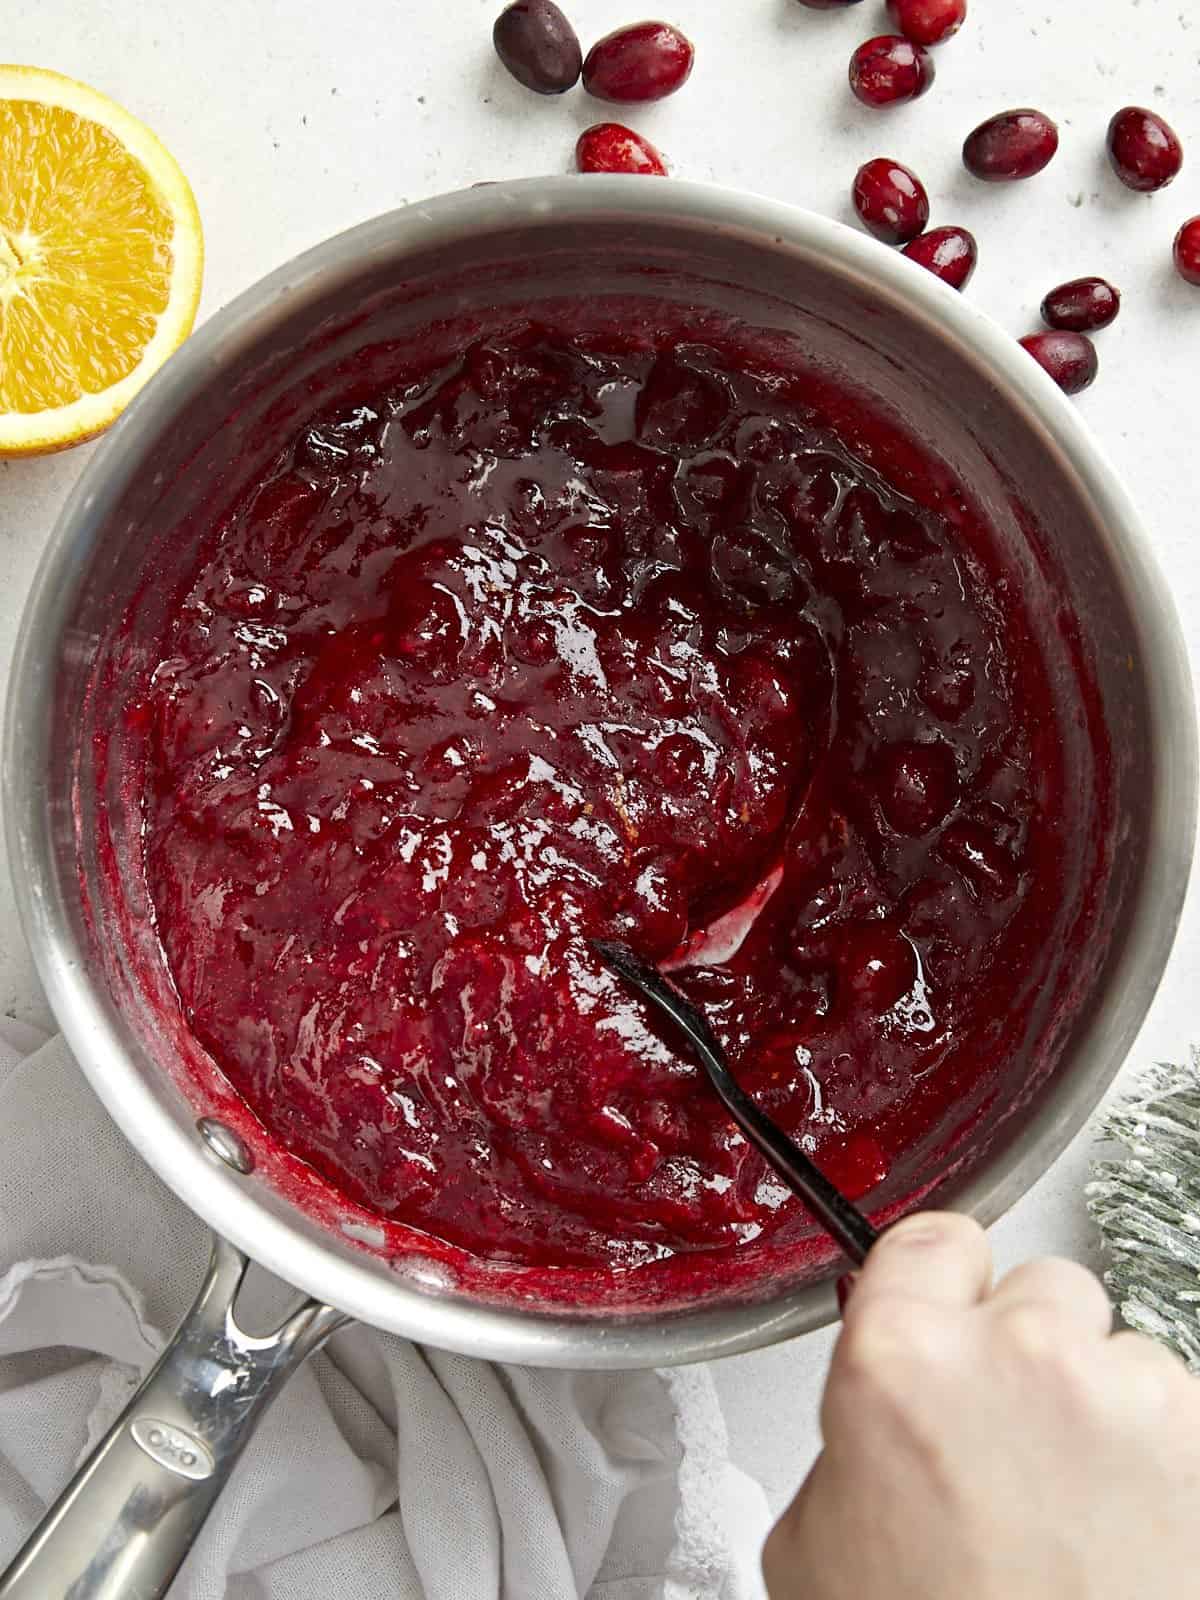 Overhead view of a pot full of homemade cranberry sauce being stirred.